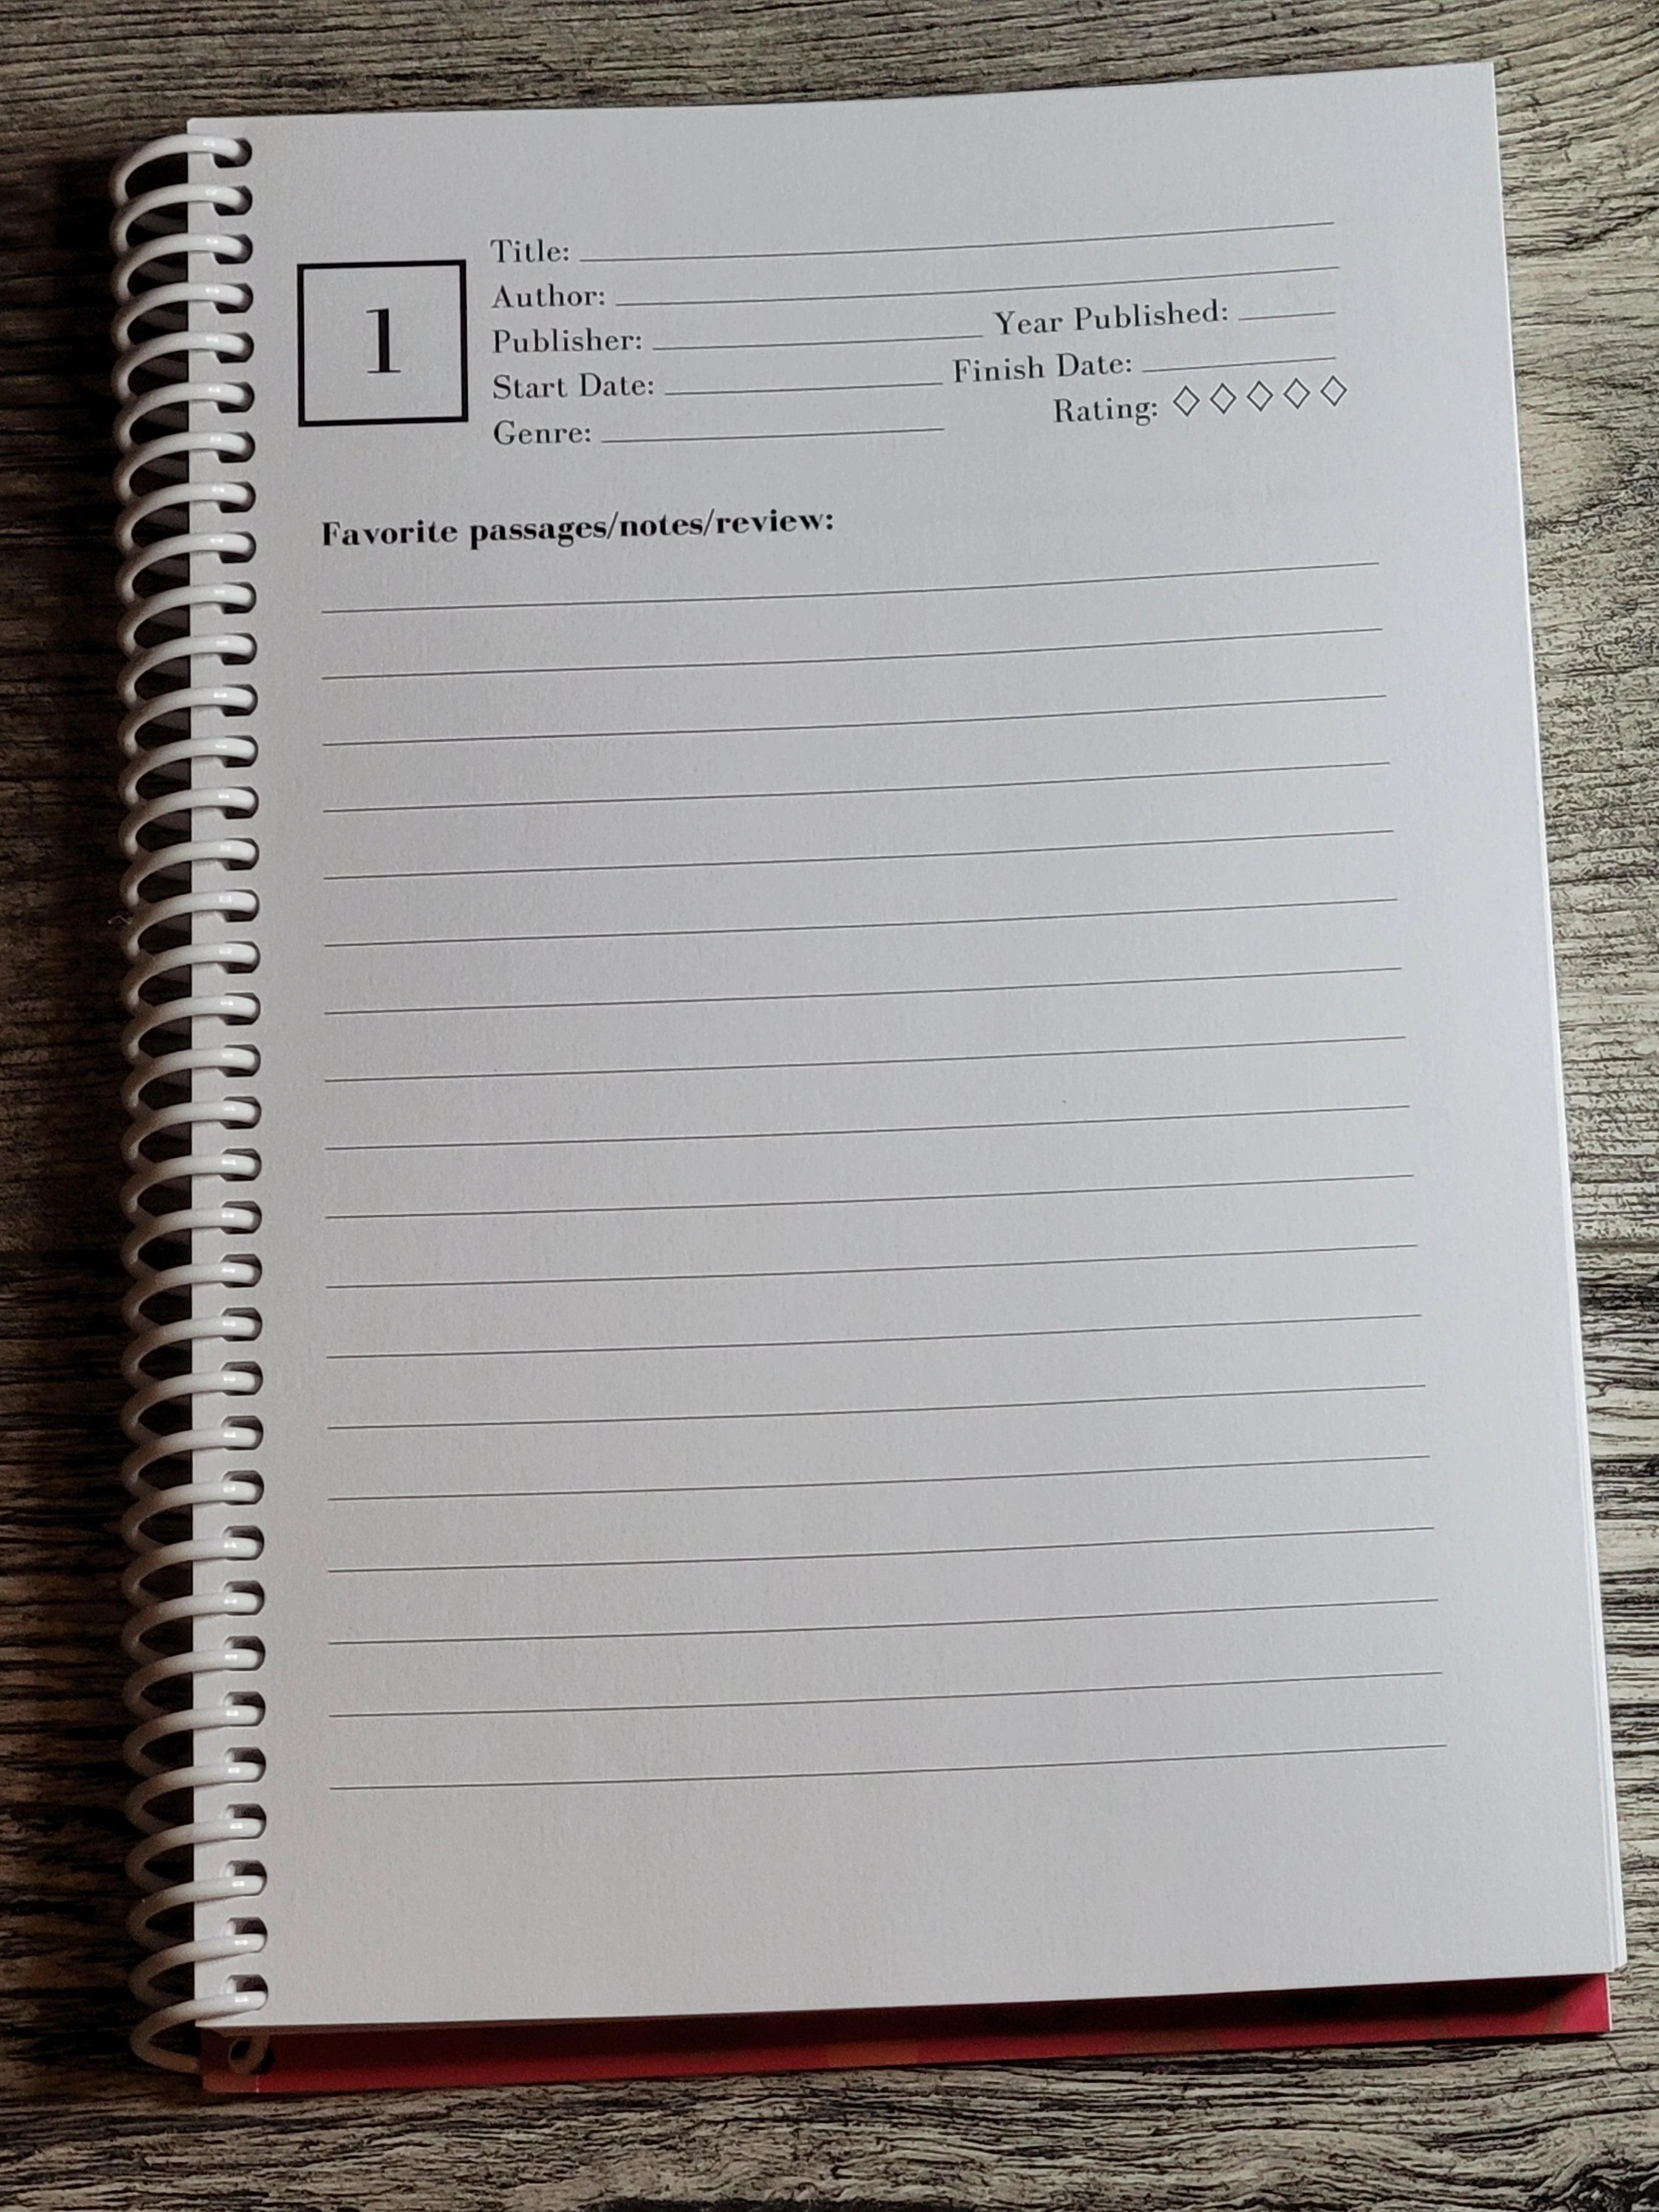 How To Start A Reading Journal